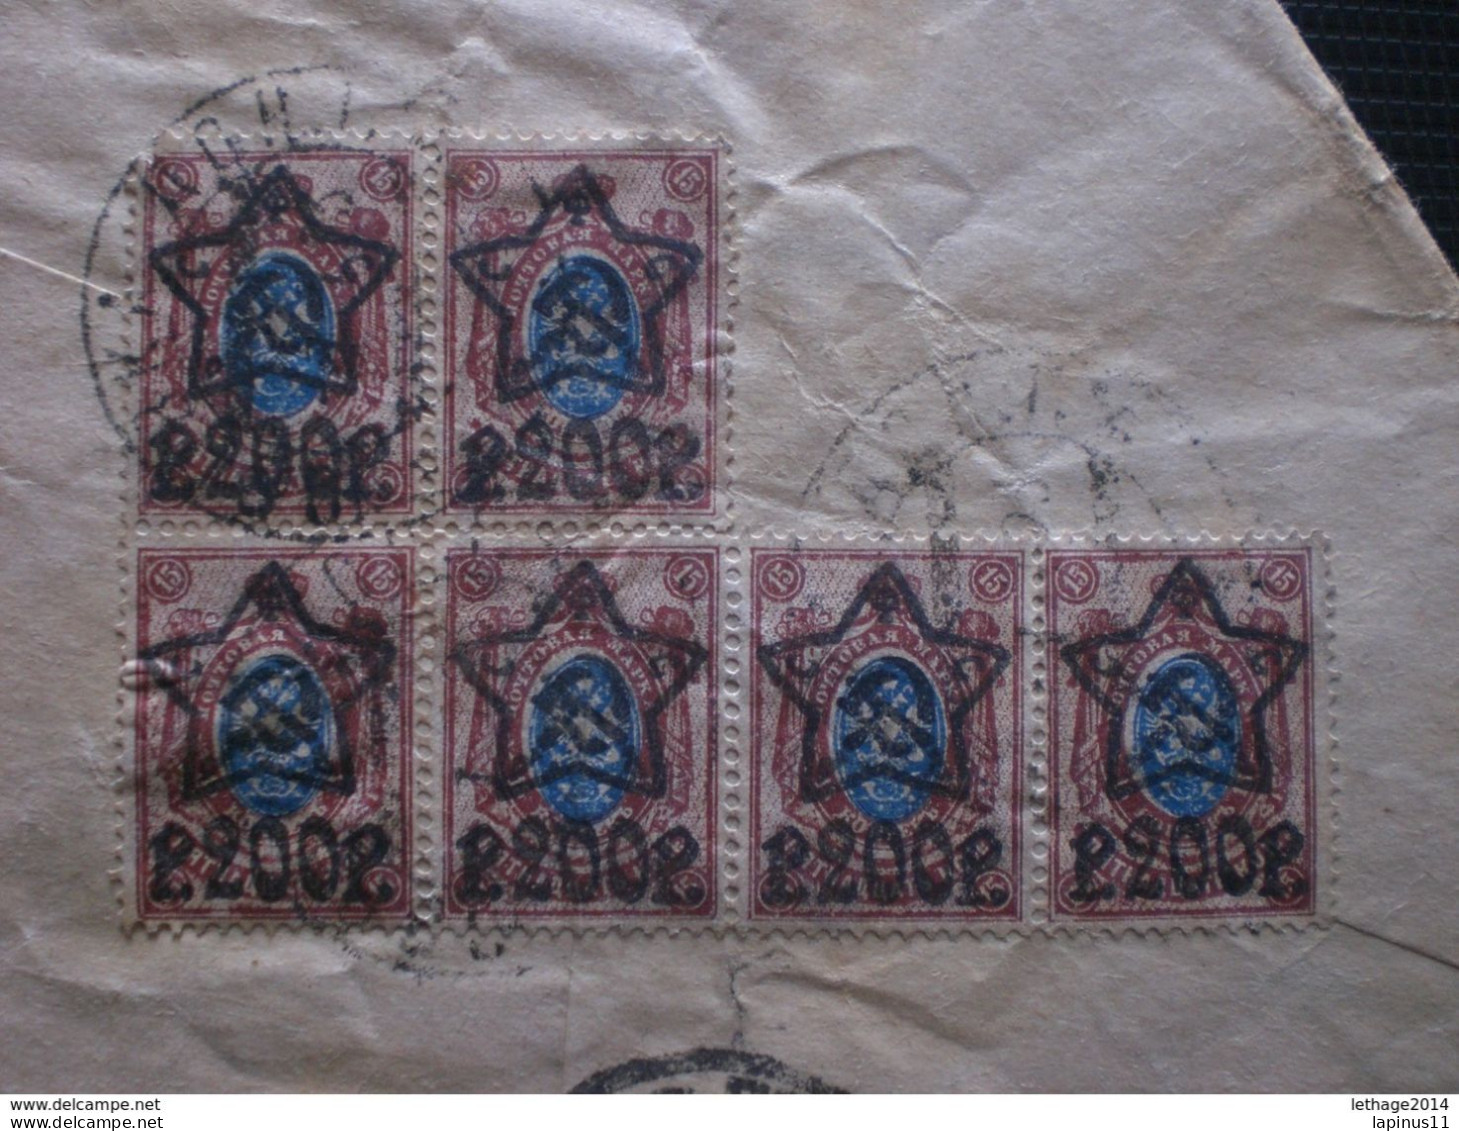 RUSSIA RUSSIE РОССИЯ STAMPS COVER 1923 RUSSIE TO ITALY FULL STAMPS RRR RIF.TAGG. (79) - Lettres & Documents